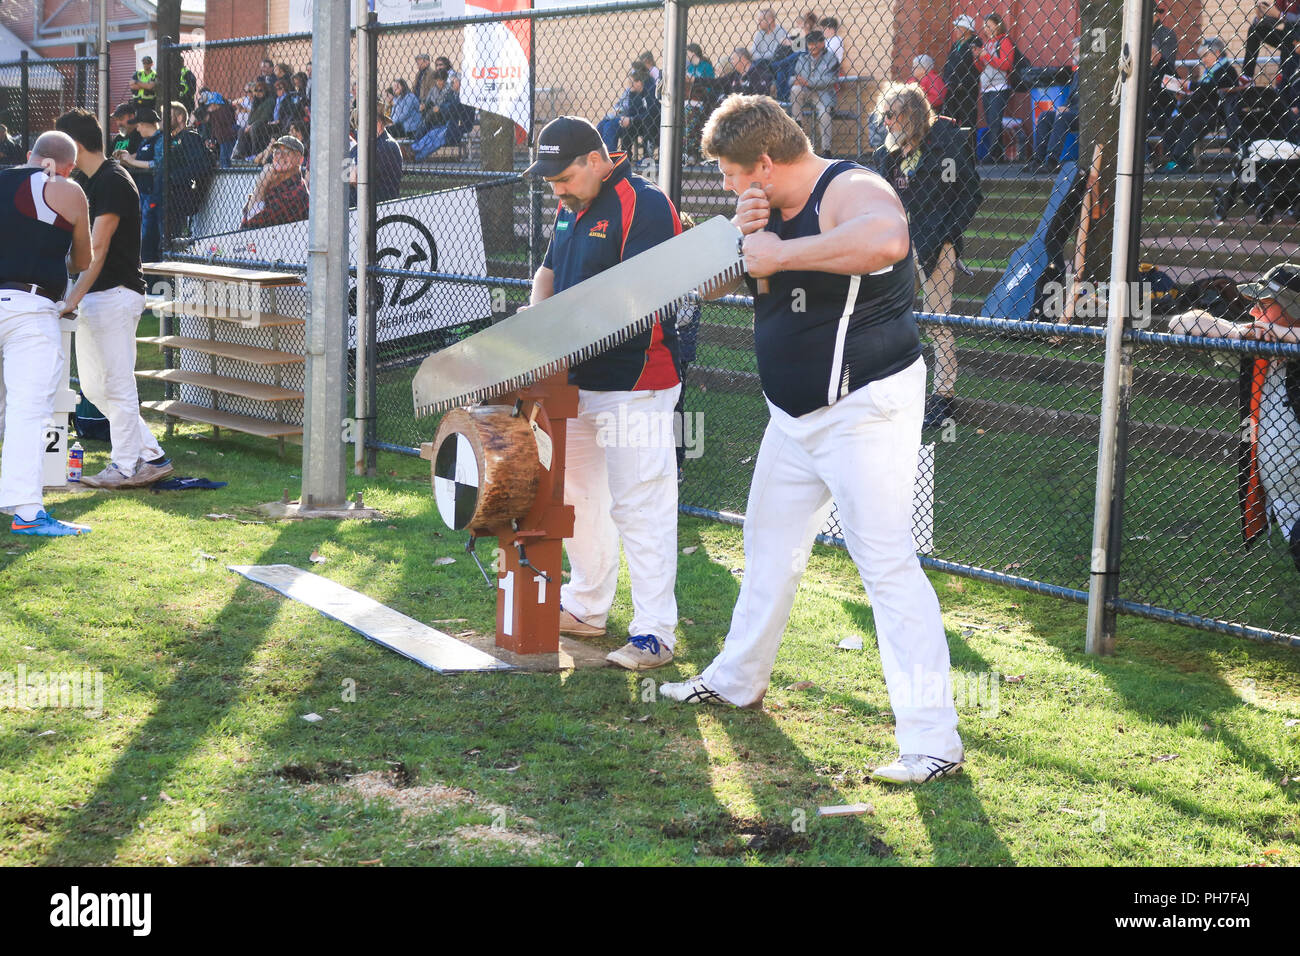 Adelaide Australia.31 August 2018.  Competitors take part in Wood Chopping competition at The Royal Adelaide Show  the annual agricultural event run by the Royal Agricultural and Horticultural Society of South Australia  opens at the showgrounds from 31 August-9 September showcasing livestock, local produce, cookery competitions, animals, rides, food and  entertainment Credit: amer ghazzal/Alamy Live News Stock Photo